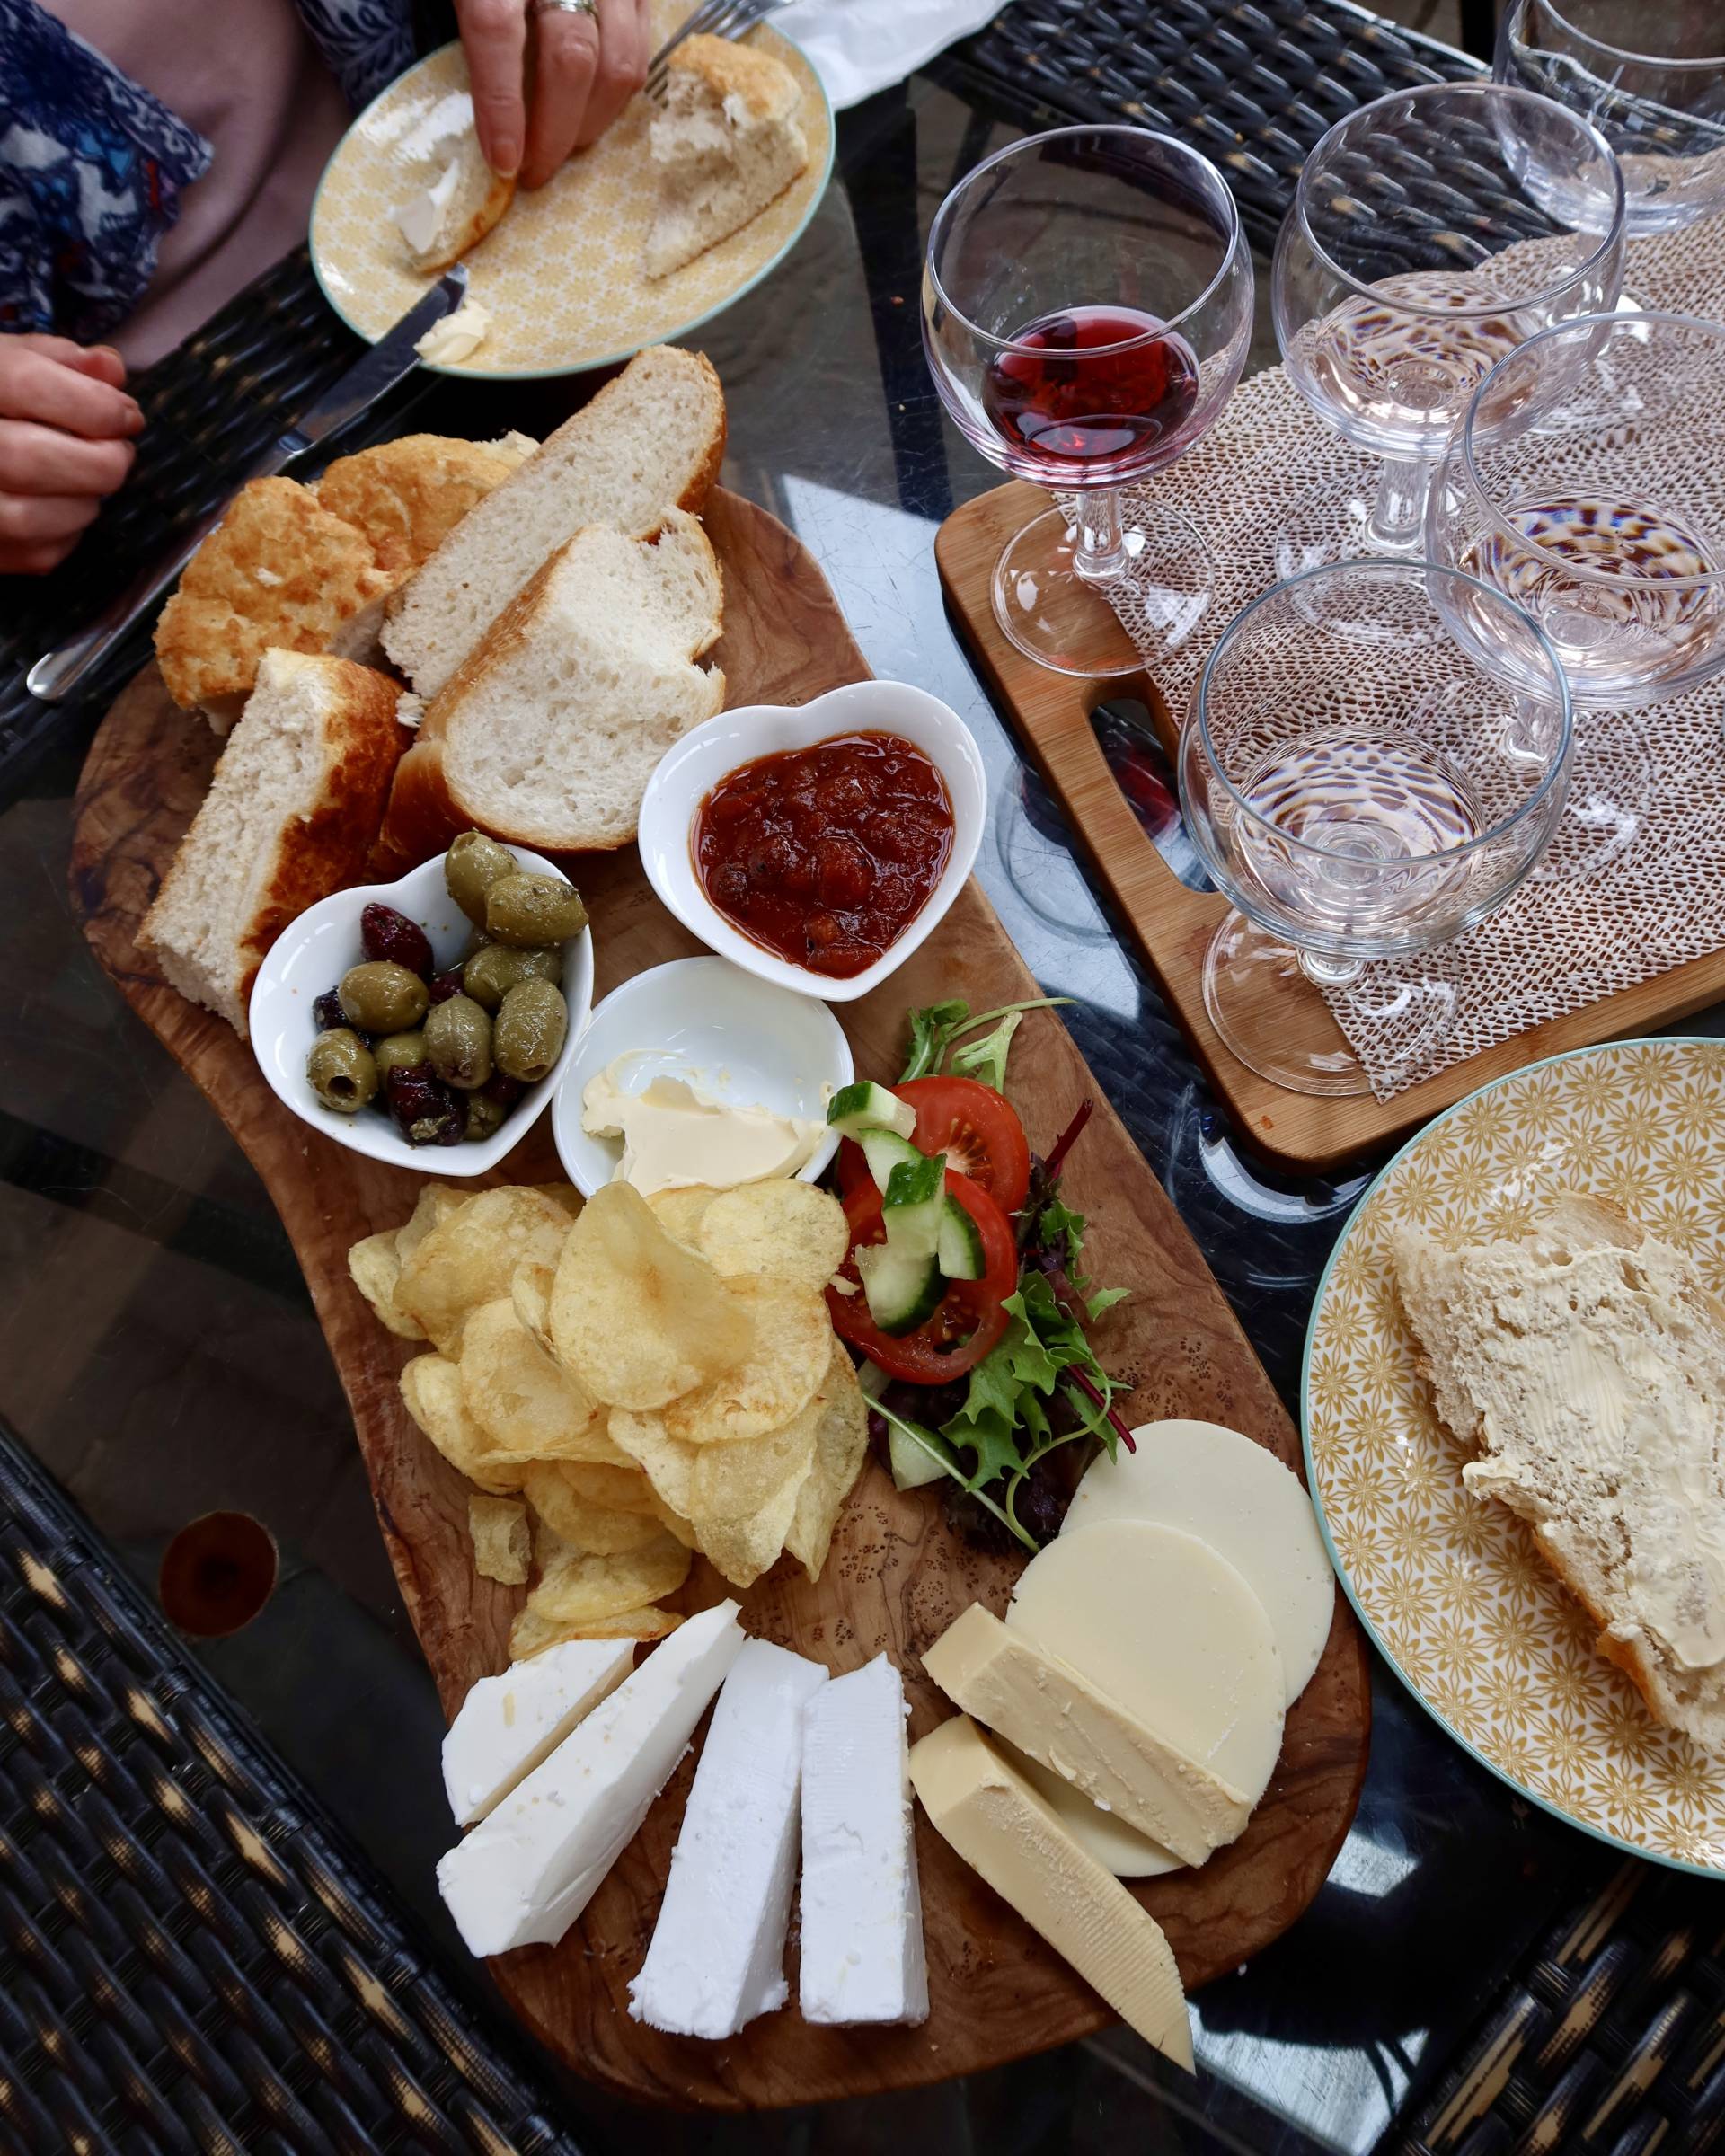 Vegan Cheese platter at Sugar Loaf Vineyard in Wales with chutney and olives and bread